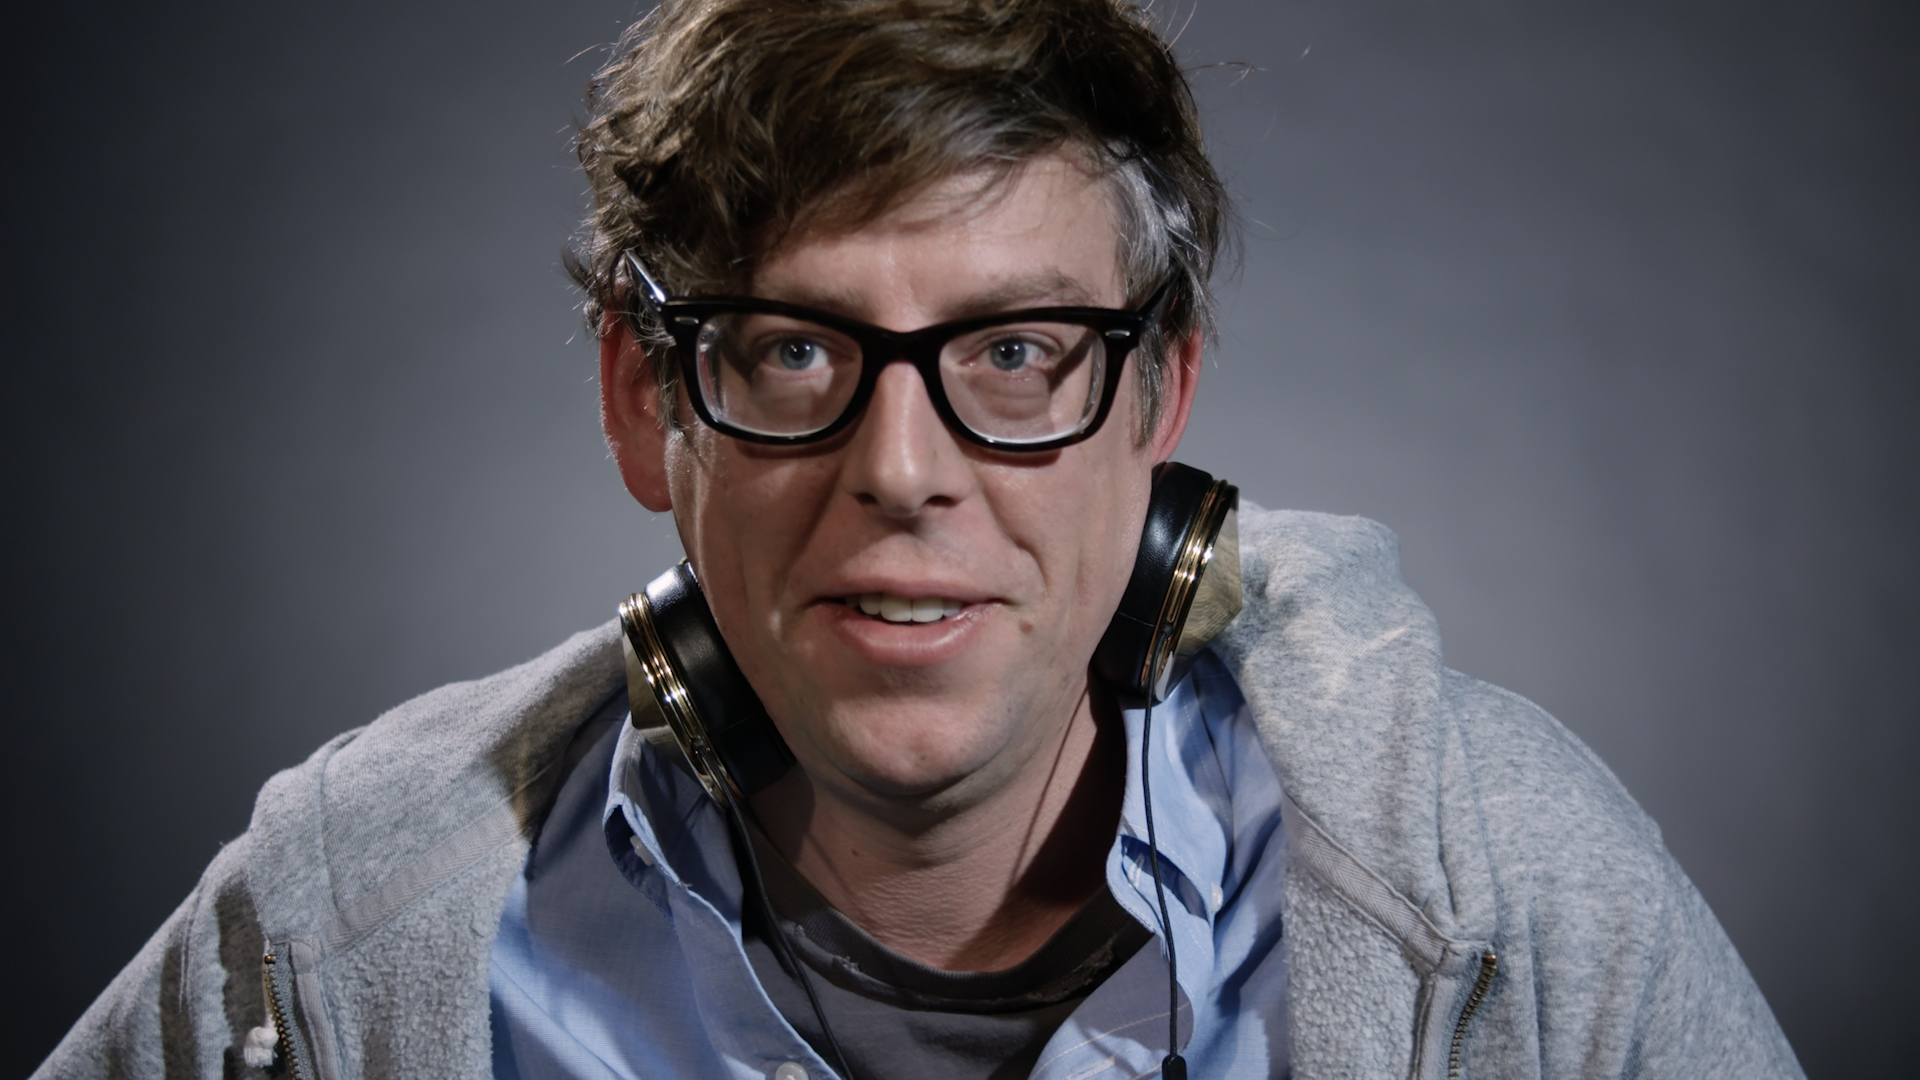 When you look up and notice Patrick Carney is in front of you at Starbucks  : r/TheBlackKeys